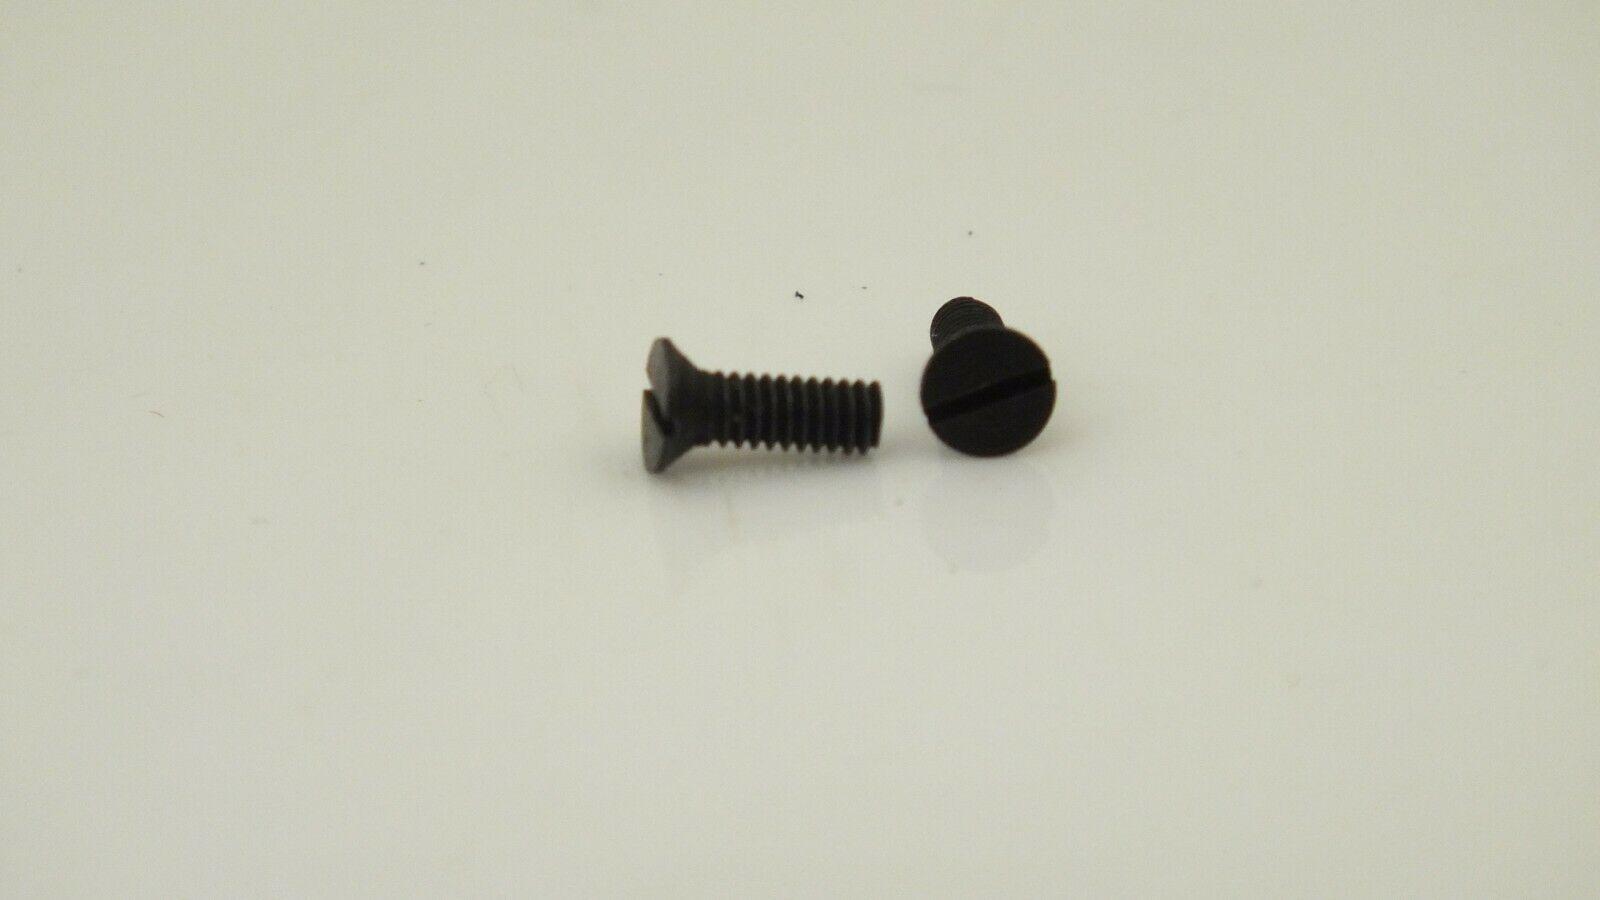 S1060 x 2 #  HORNBY  TRIANG SPARE BODY FIXING SCREWS  0-4-0           G11A